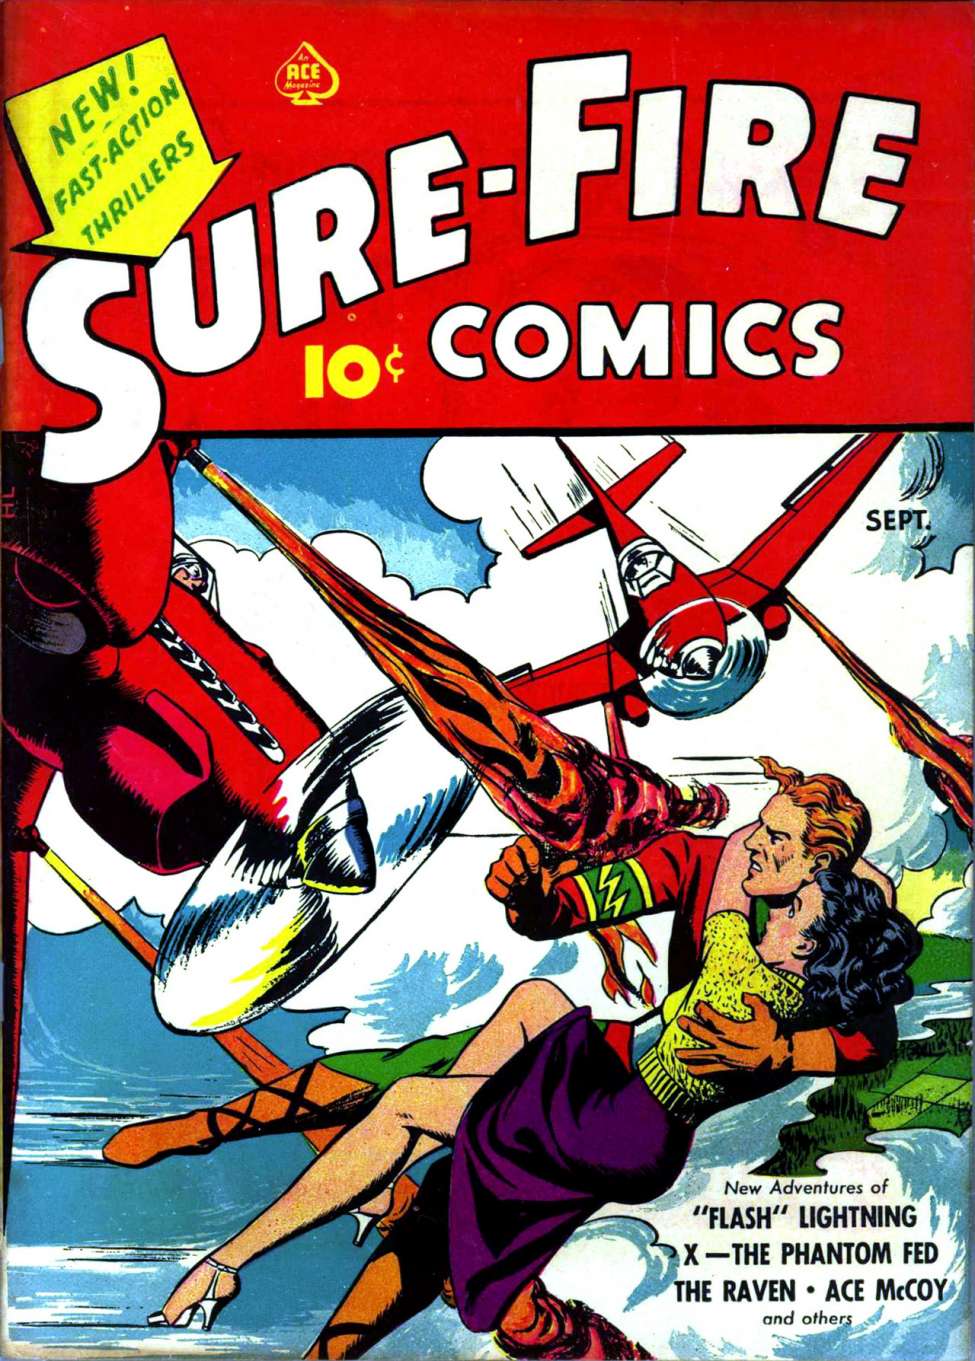 Book Cover For Sure-Fire Comics 3a